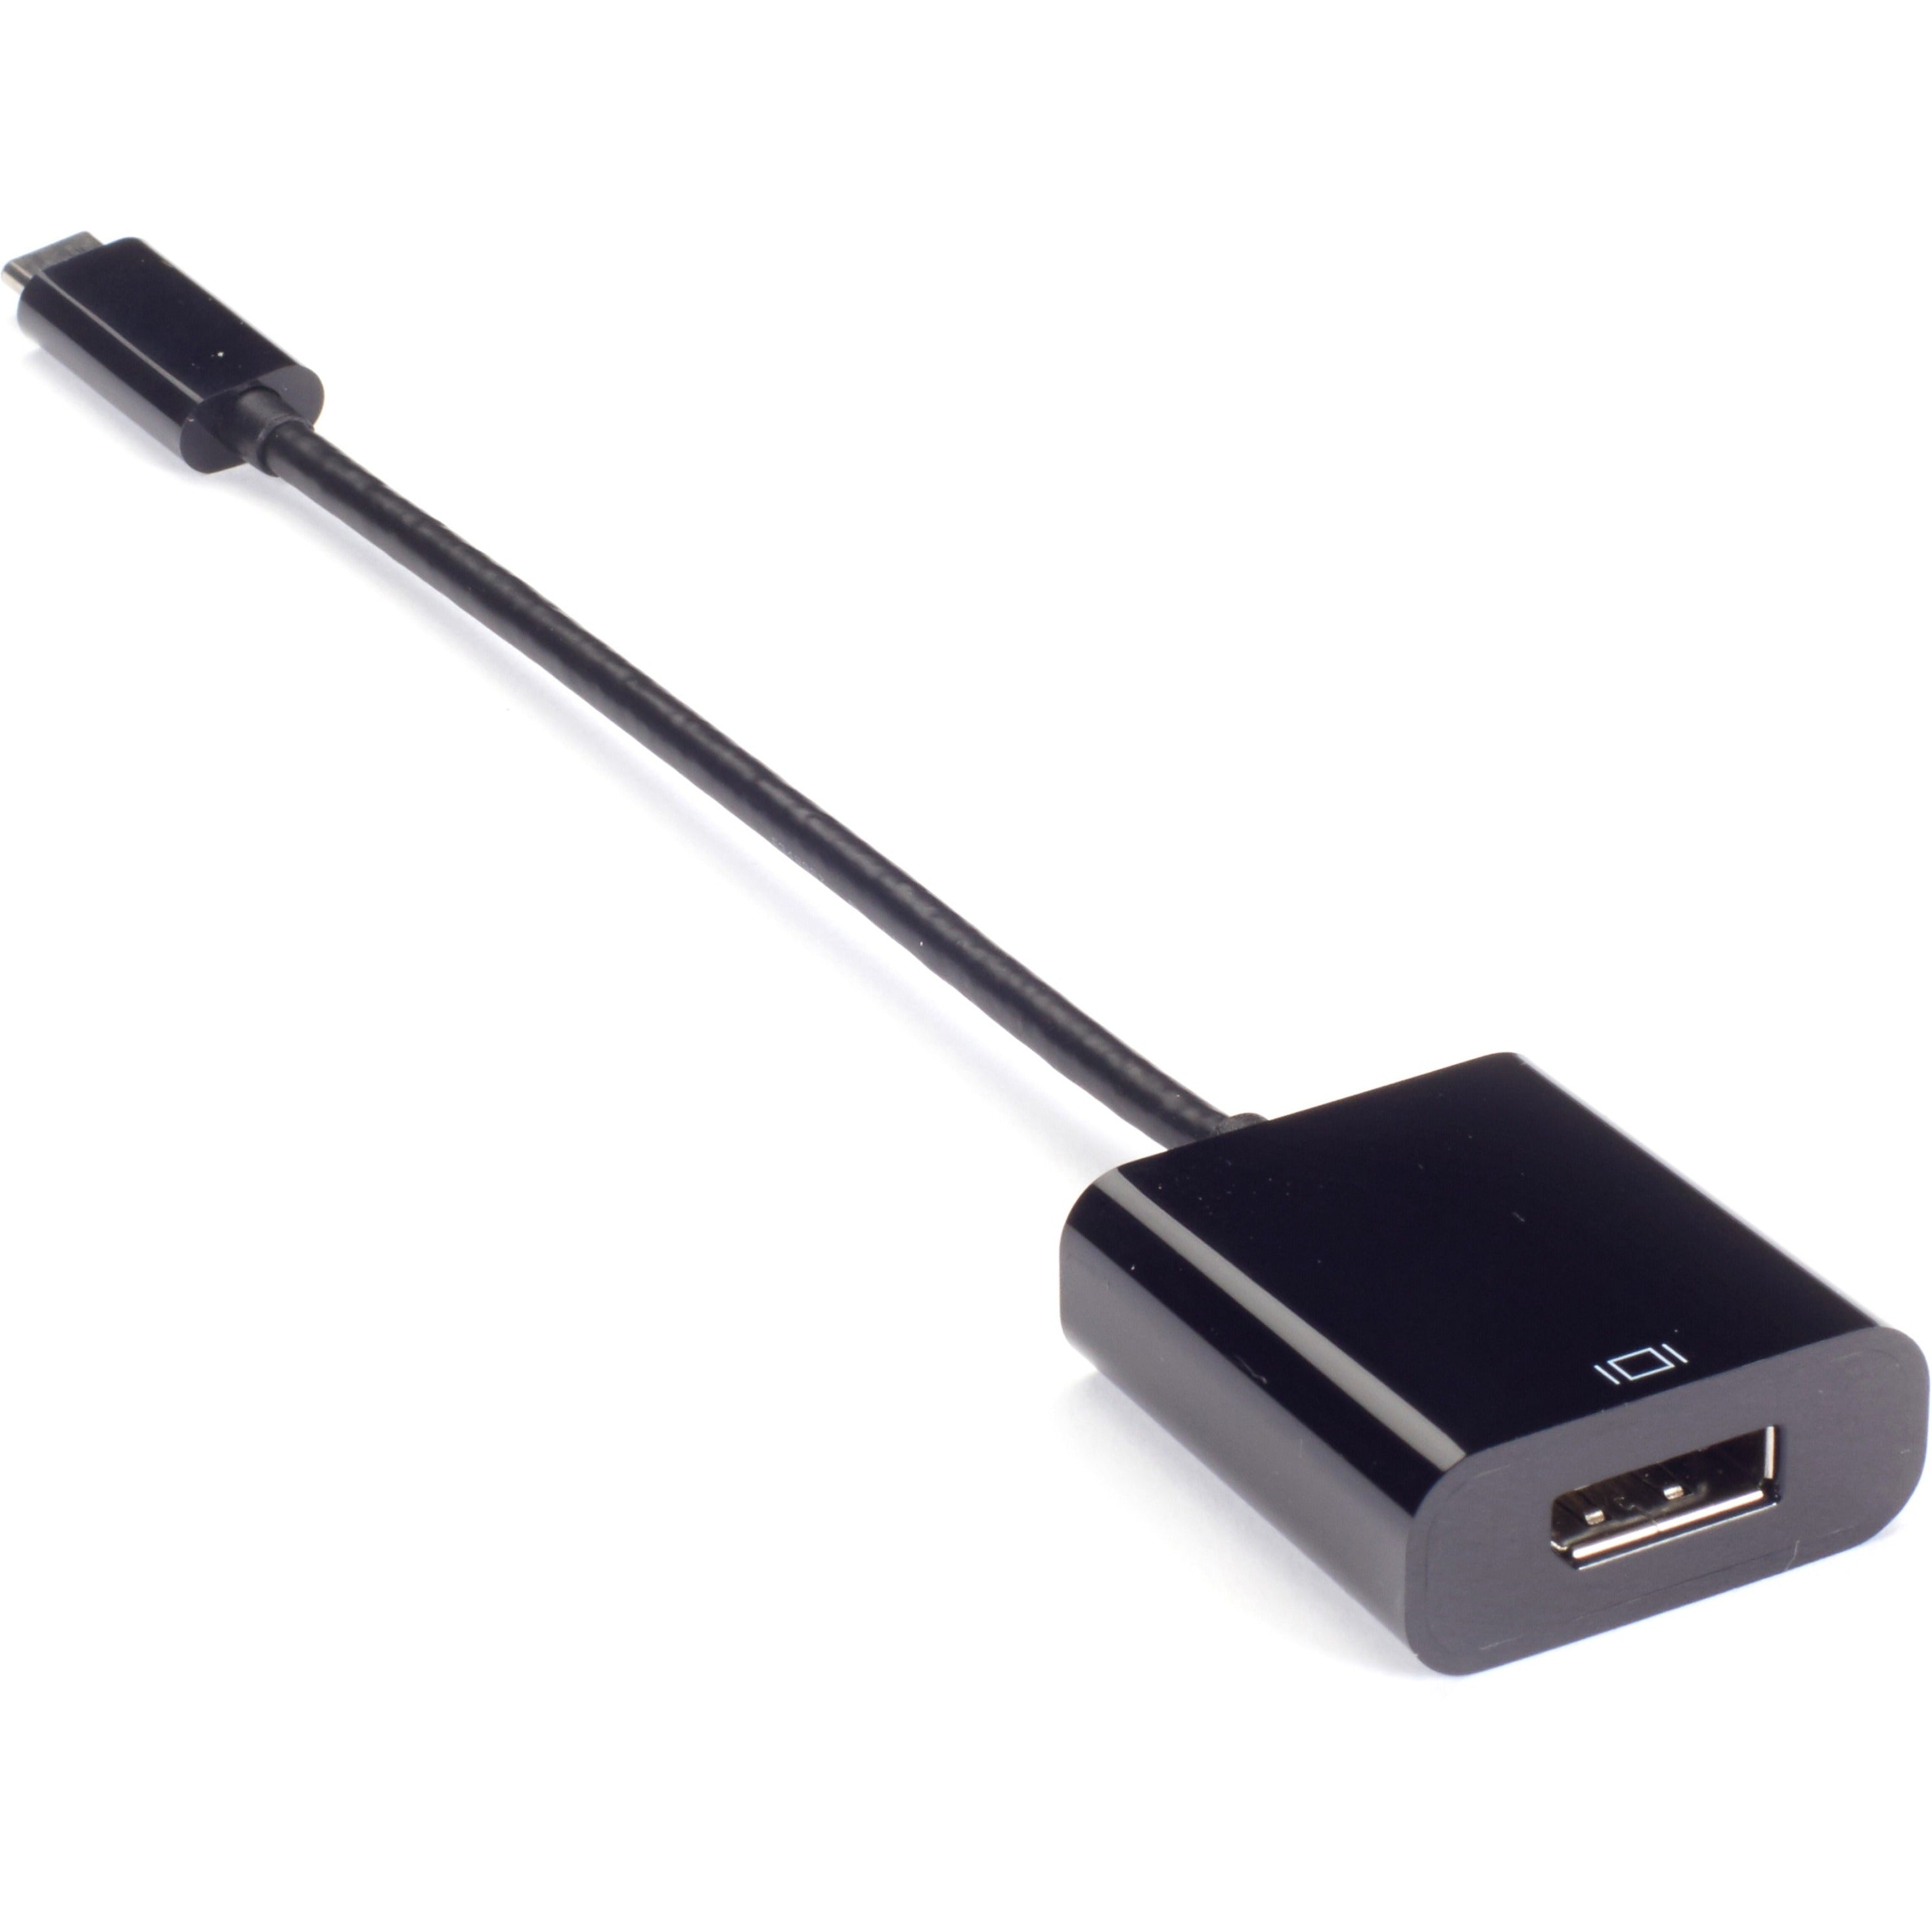 Black Box VA-USBC31-DP12 Video Adapter Dongle USB 3.1 Type C Male to DisplayPort 1.2 Female, 4K Resolution Supported